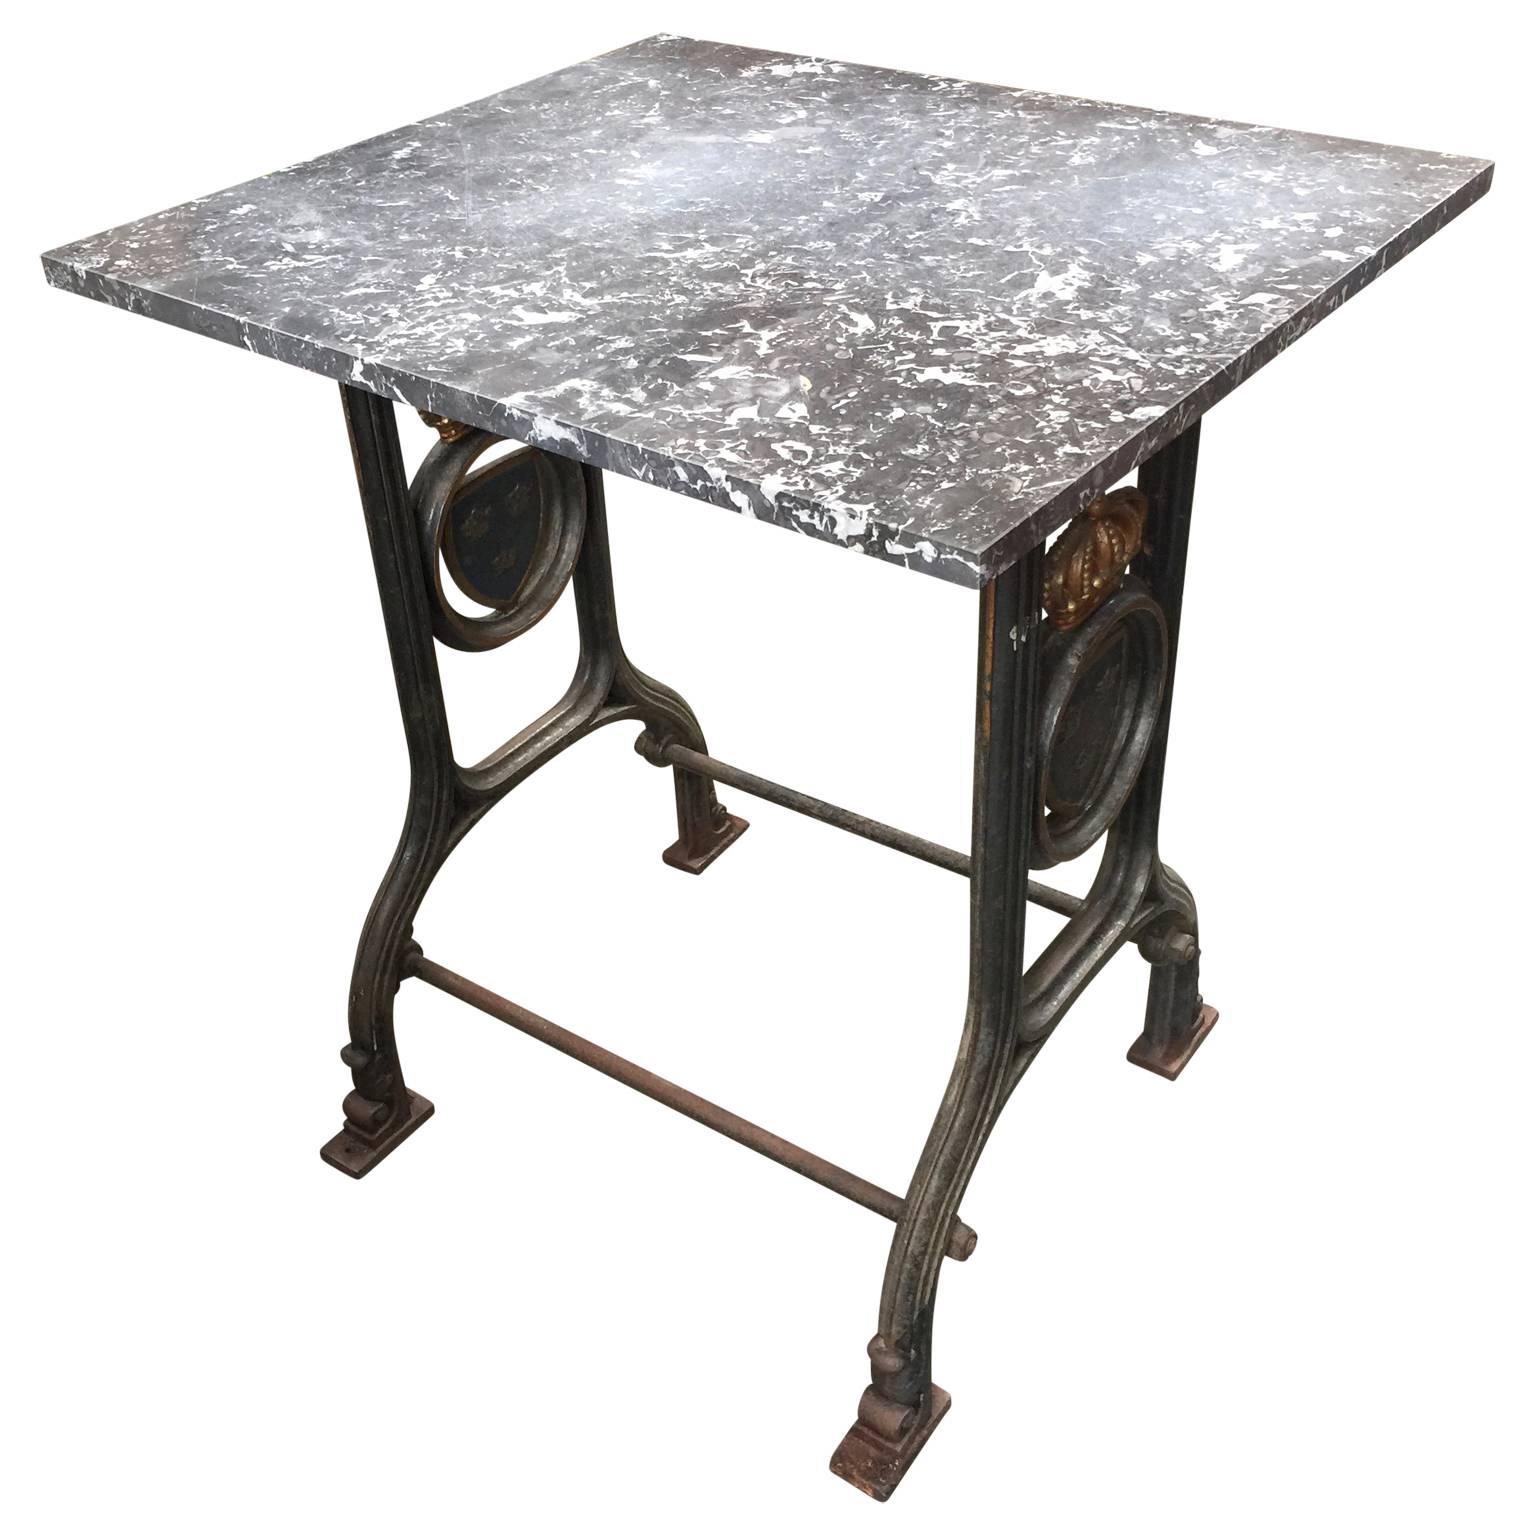 19th Century Cast Iron Marble-Top Bistro Table with Swedish Coat of Arms